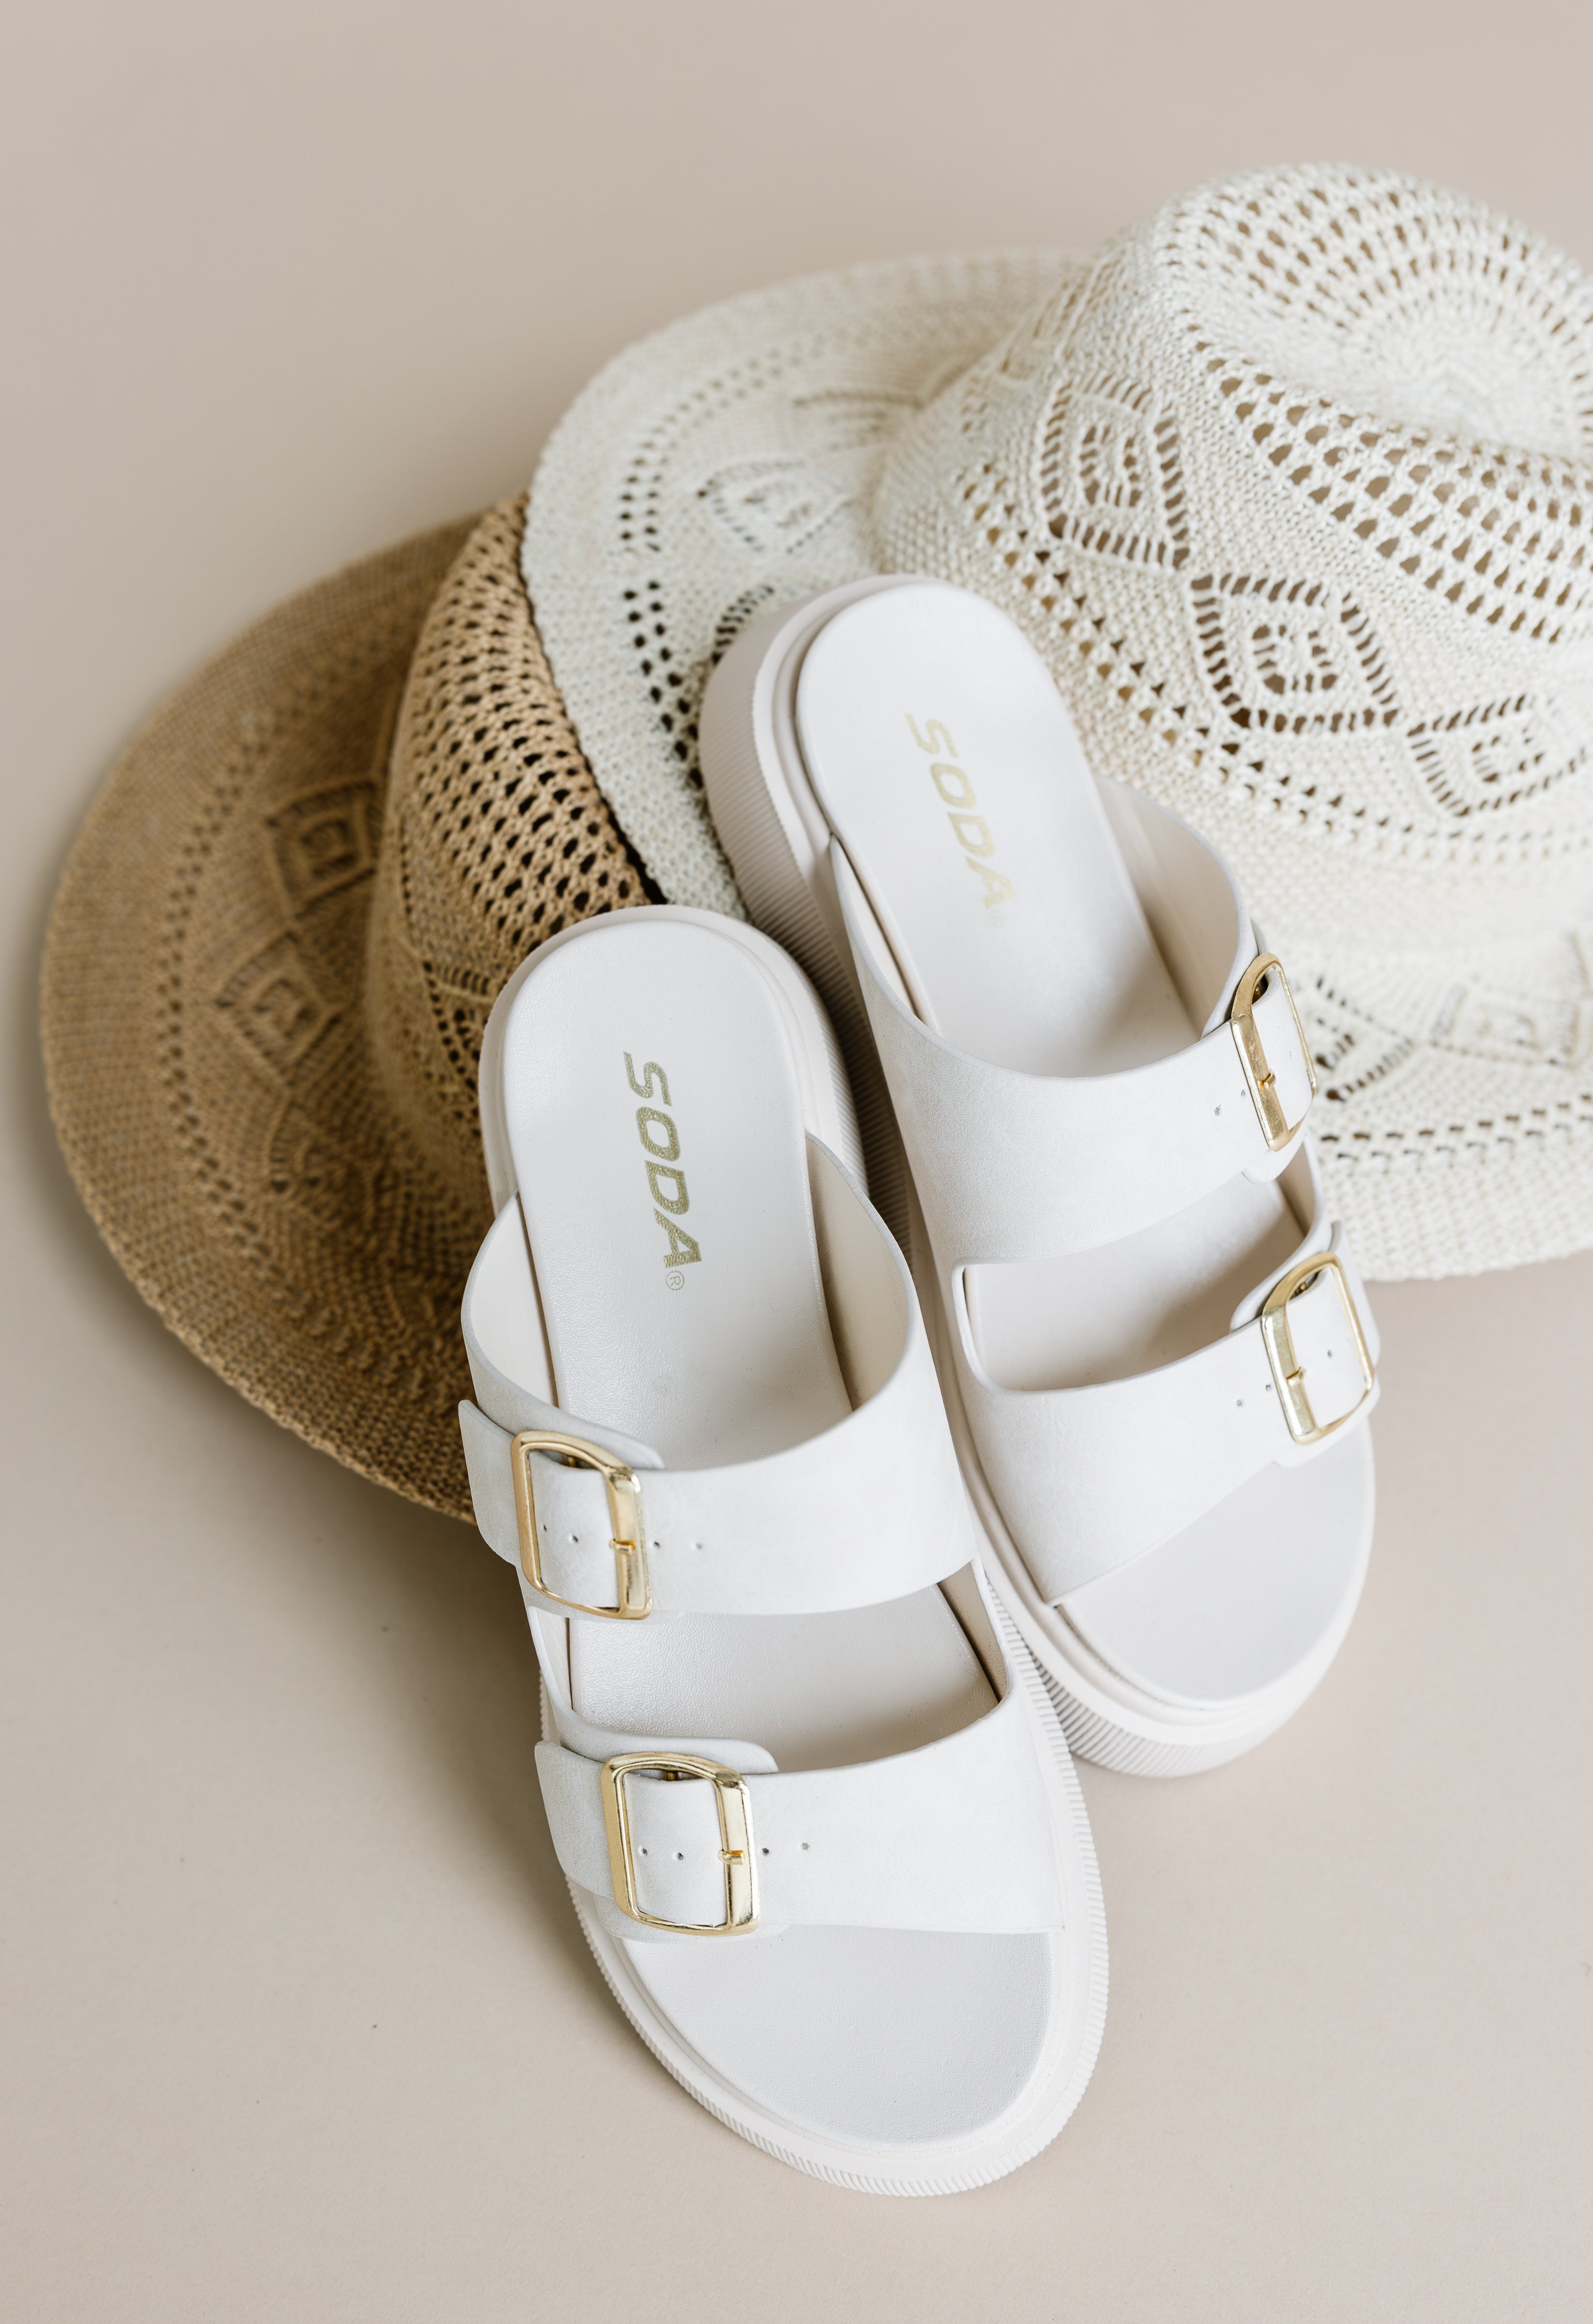 Reverie Sandals - BEIGE - willows clothing Sandals